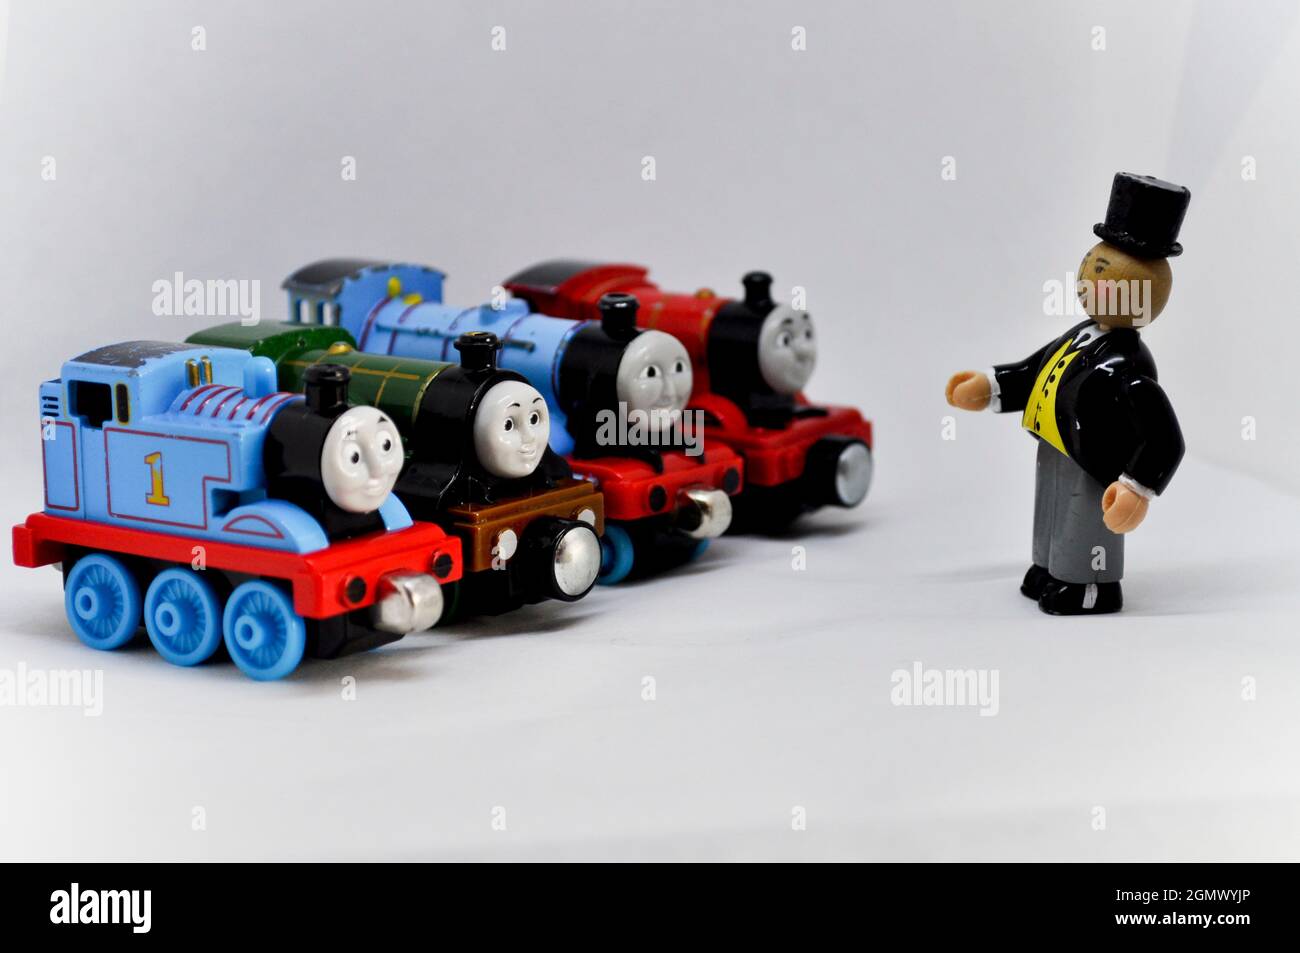 The Fat Controller speaking with toy die cast engines set against a white background Stock Photo